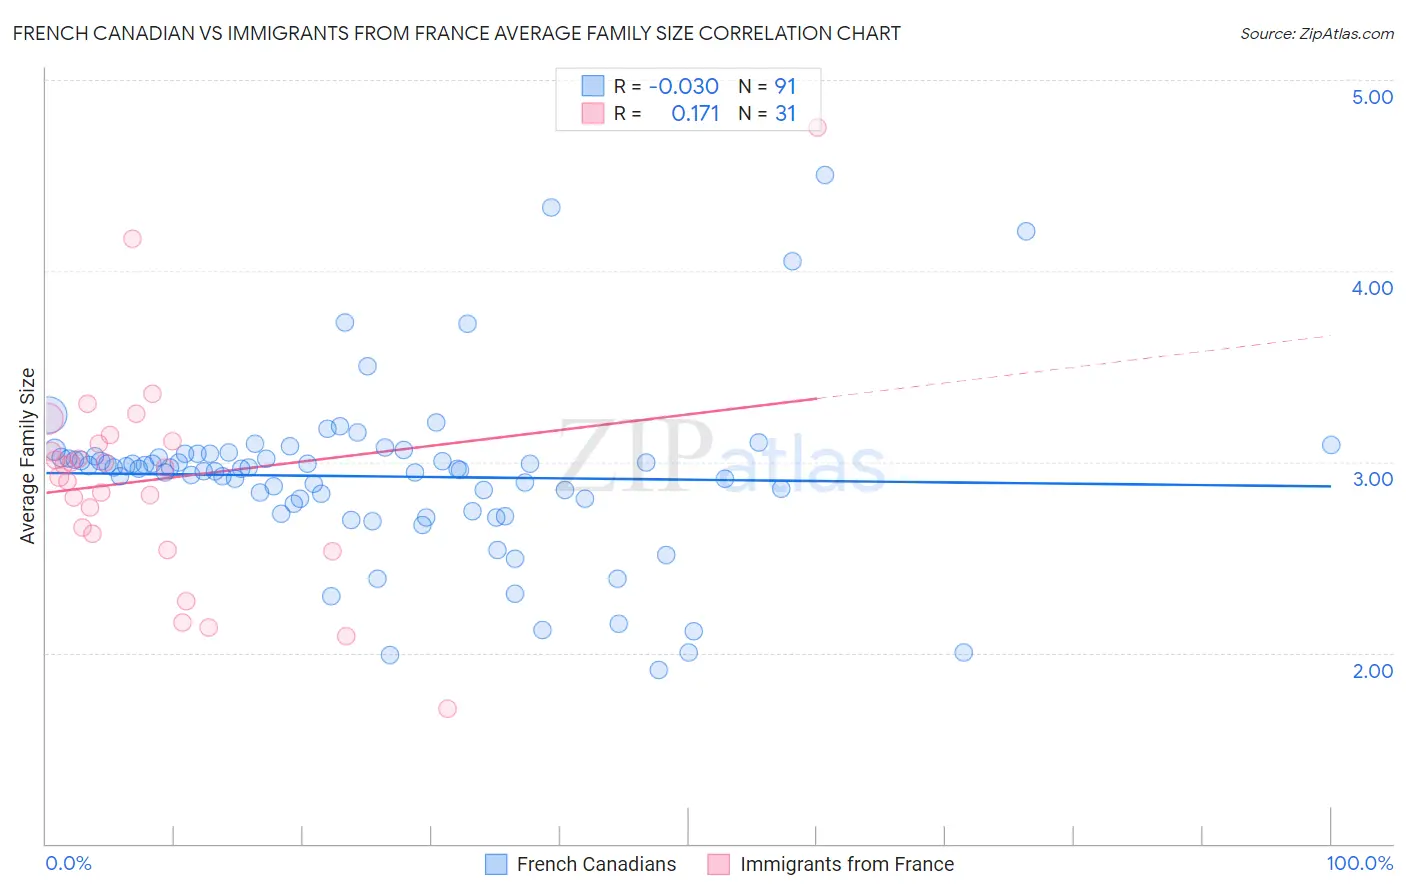 French Canadian vs Immigrants from France Average Family Size